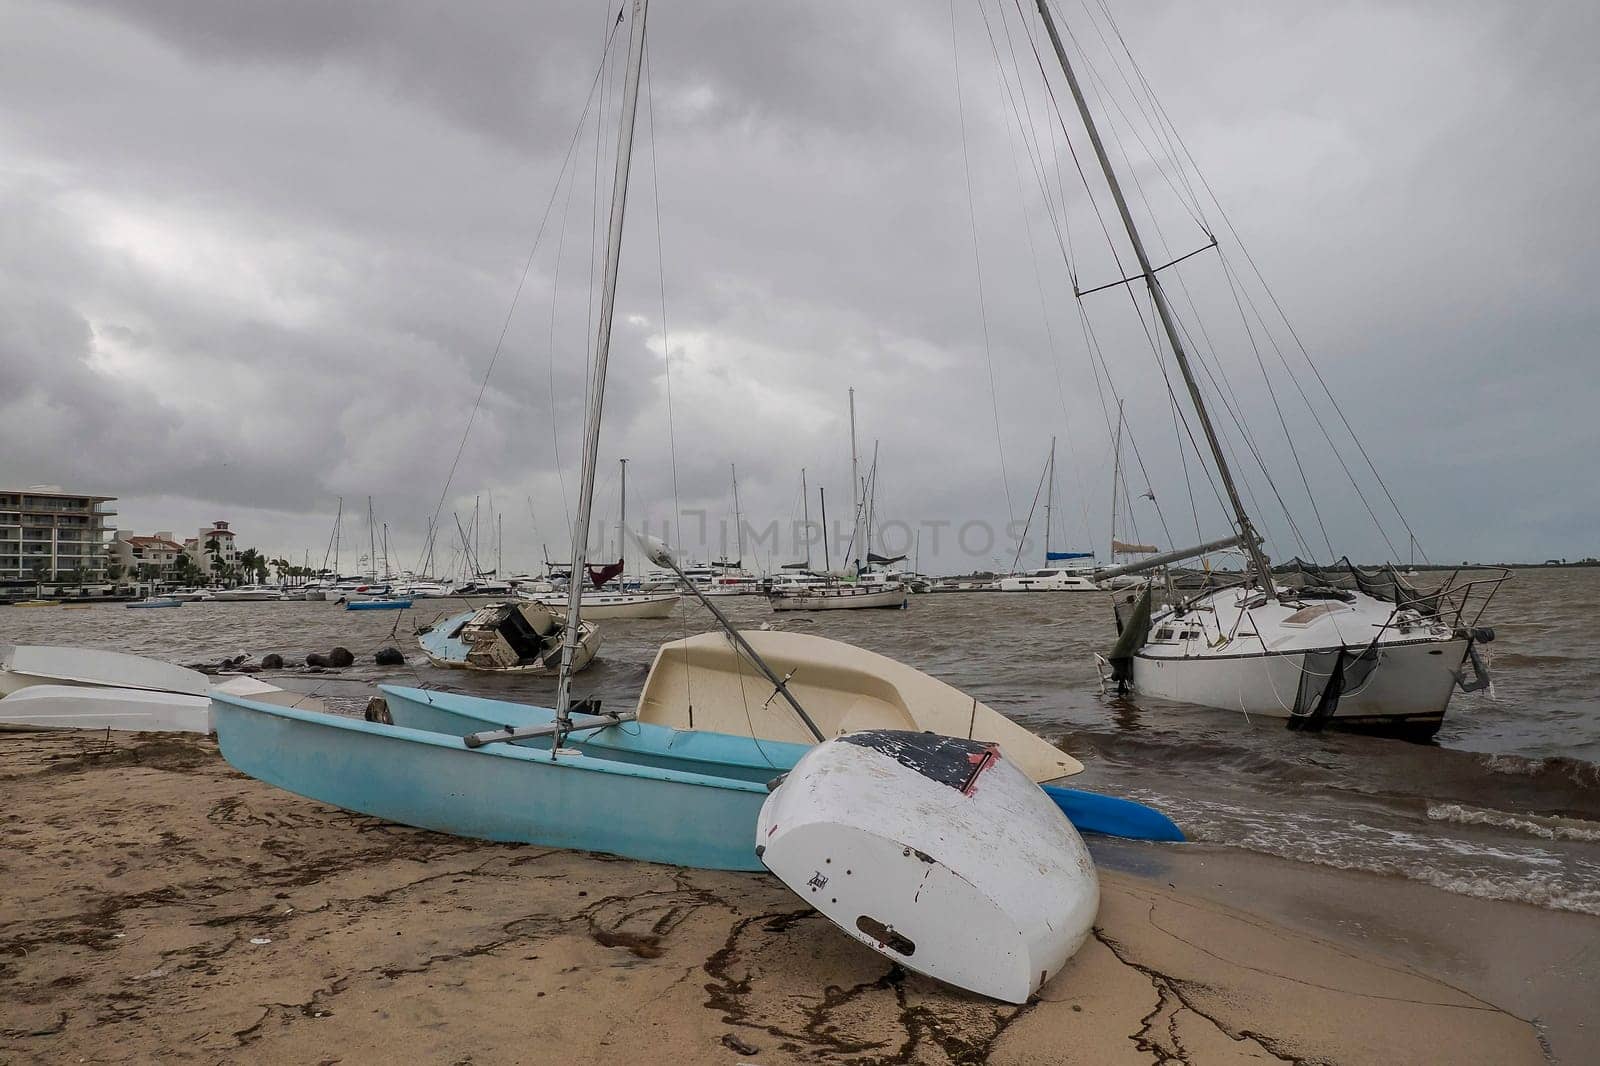 Many yacht stranded on the malecon of La Paz after the passage of Hurricane Norma on October 2023 Baja California Sur